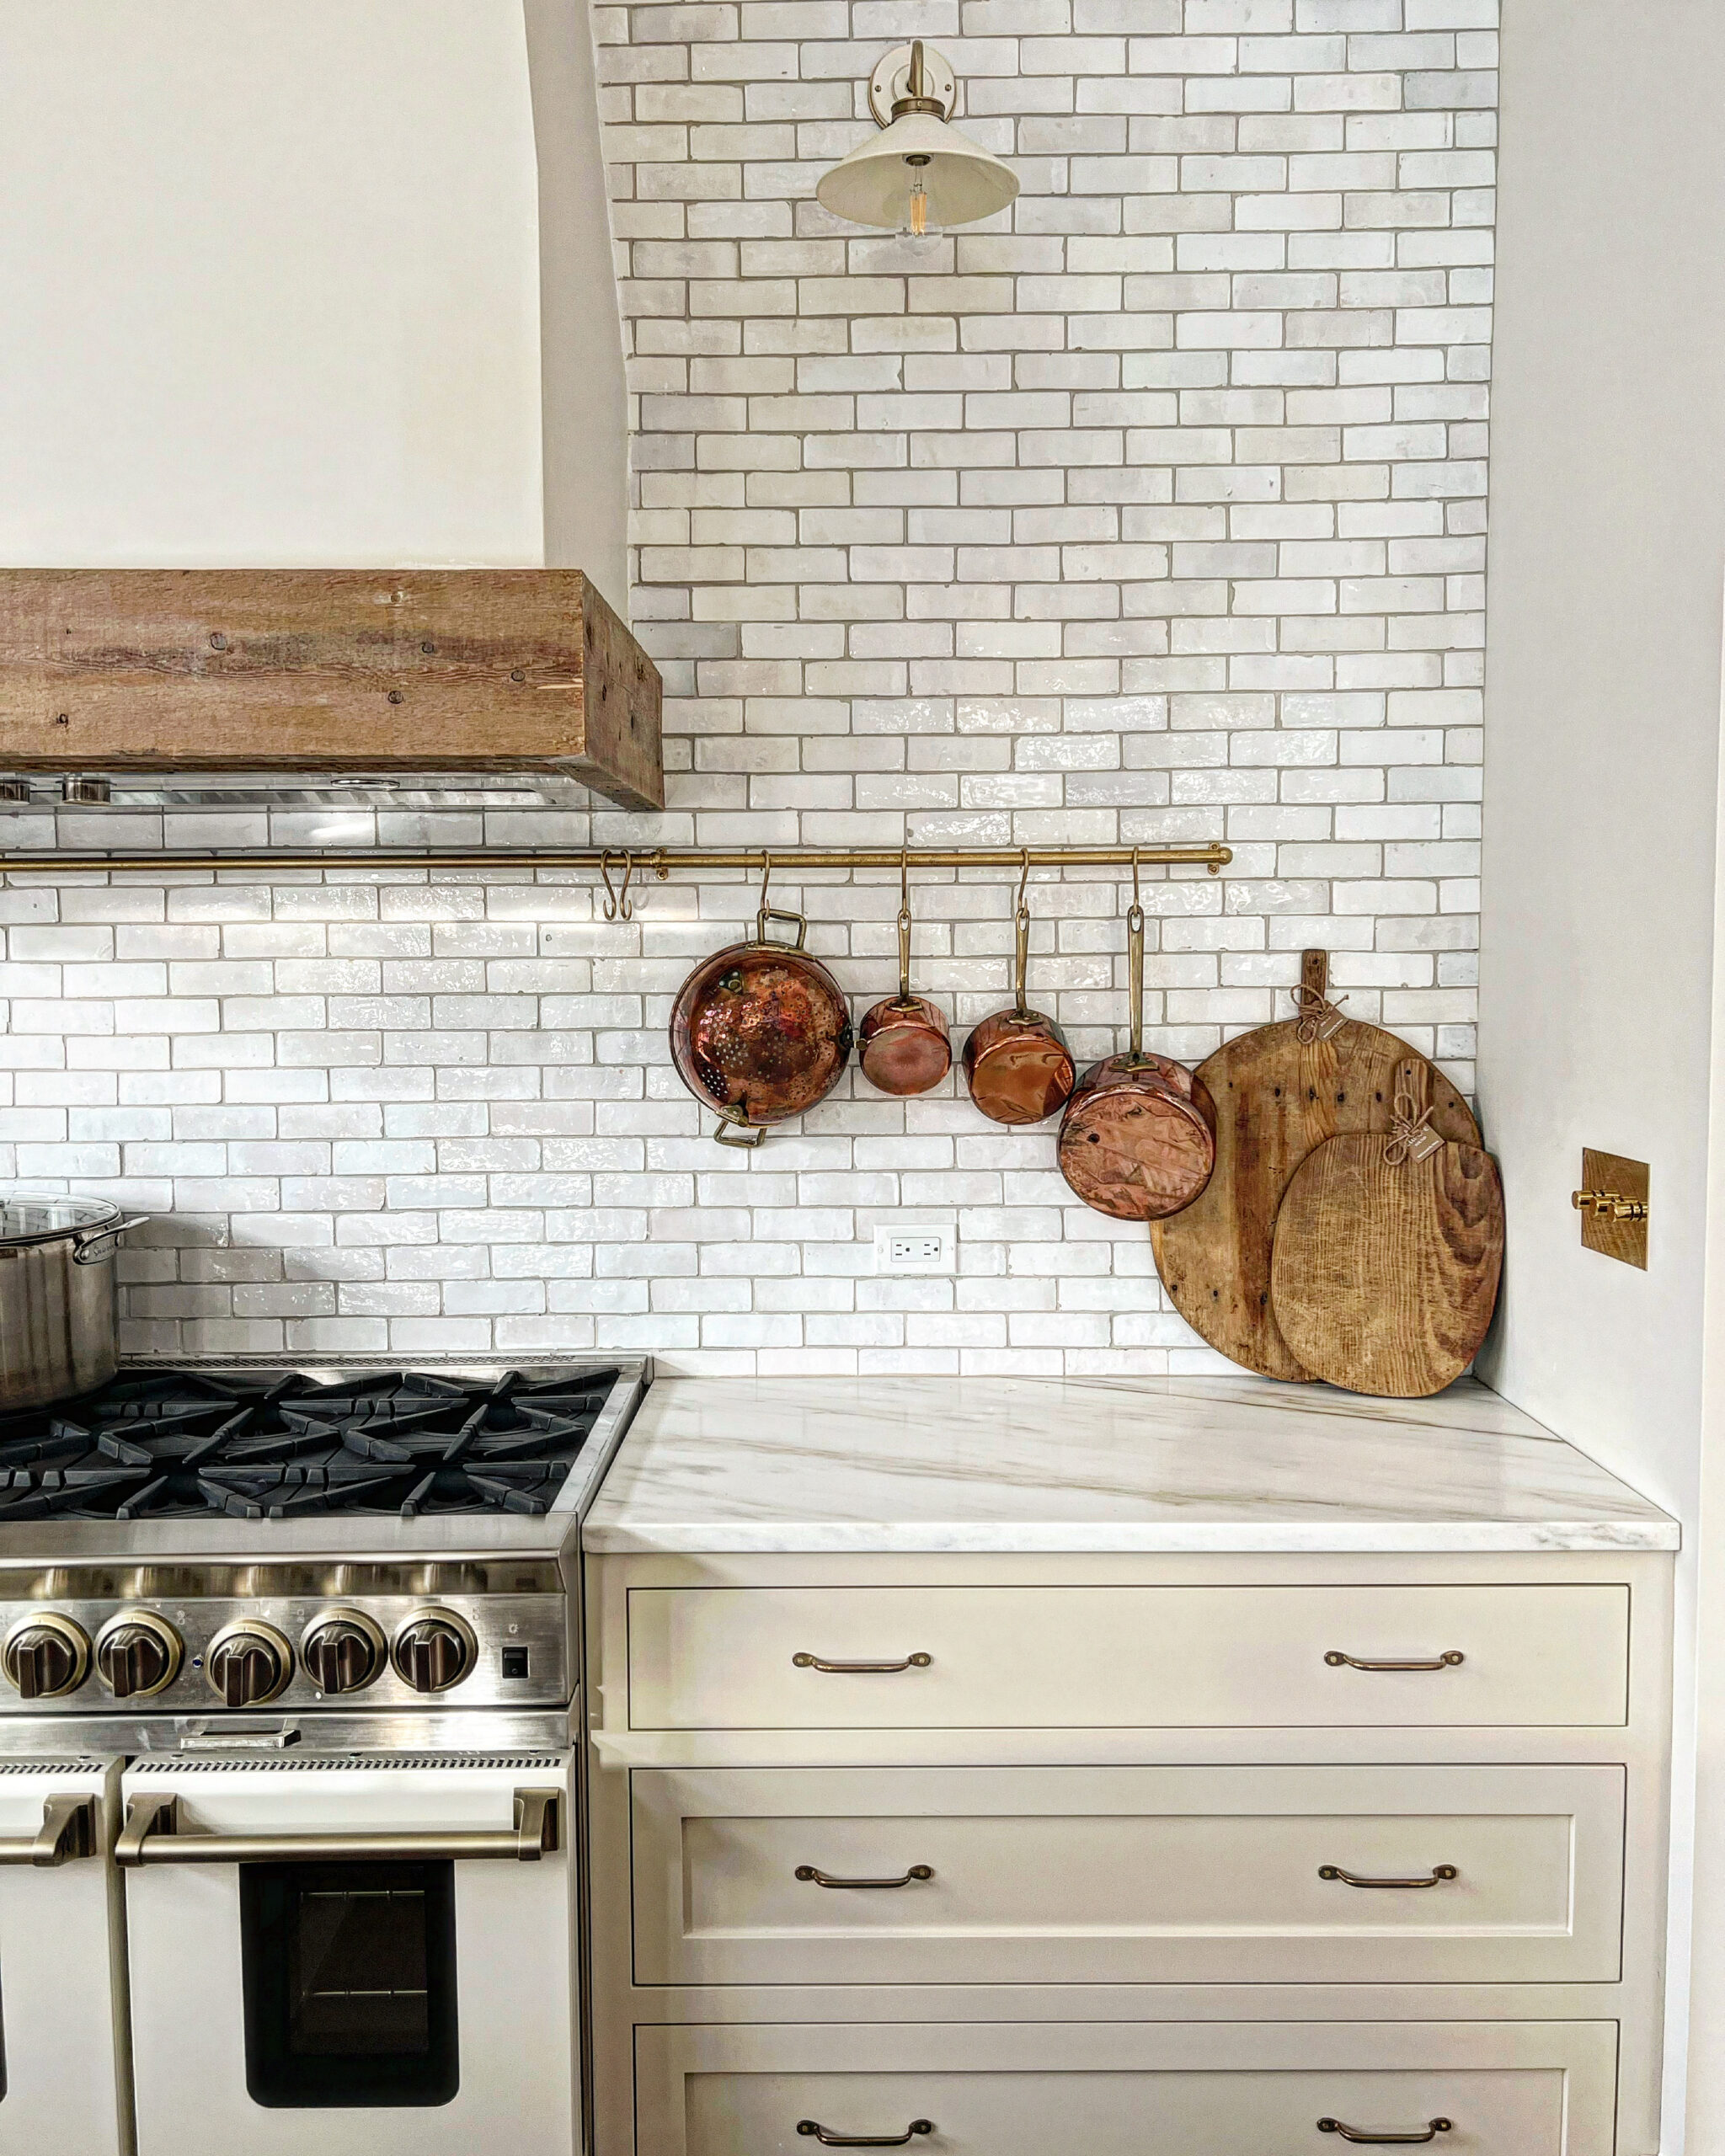 59 Kitchen Backsplash Ideas for Every Style and Budget